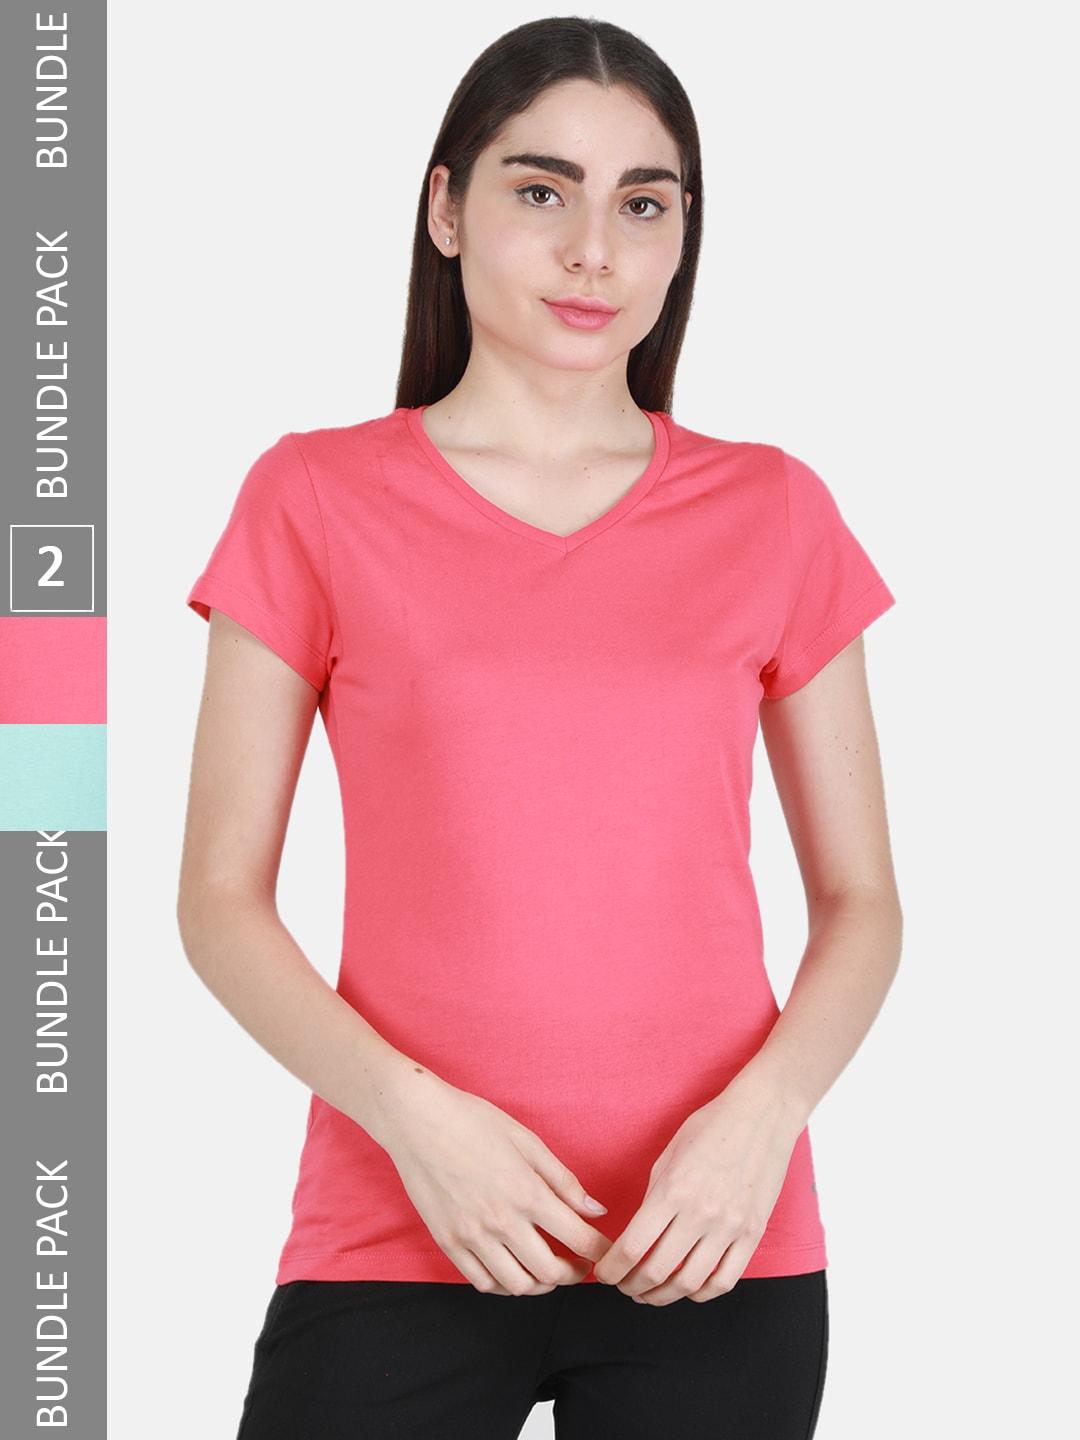 monte-carlo-women-pack-of-2-cotton-v-neck-tops